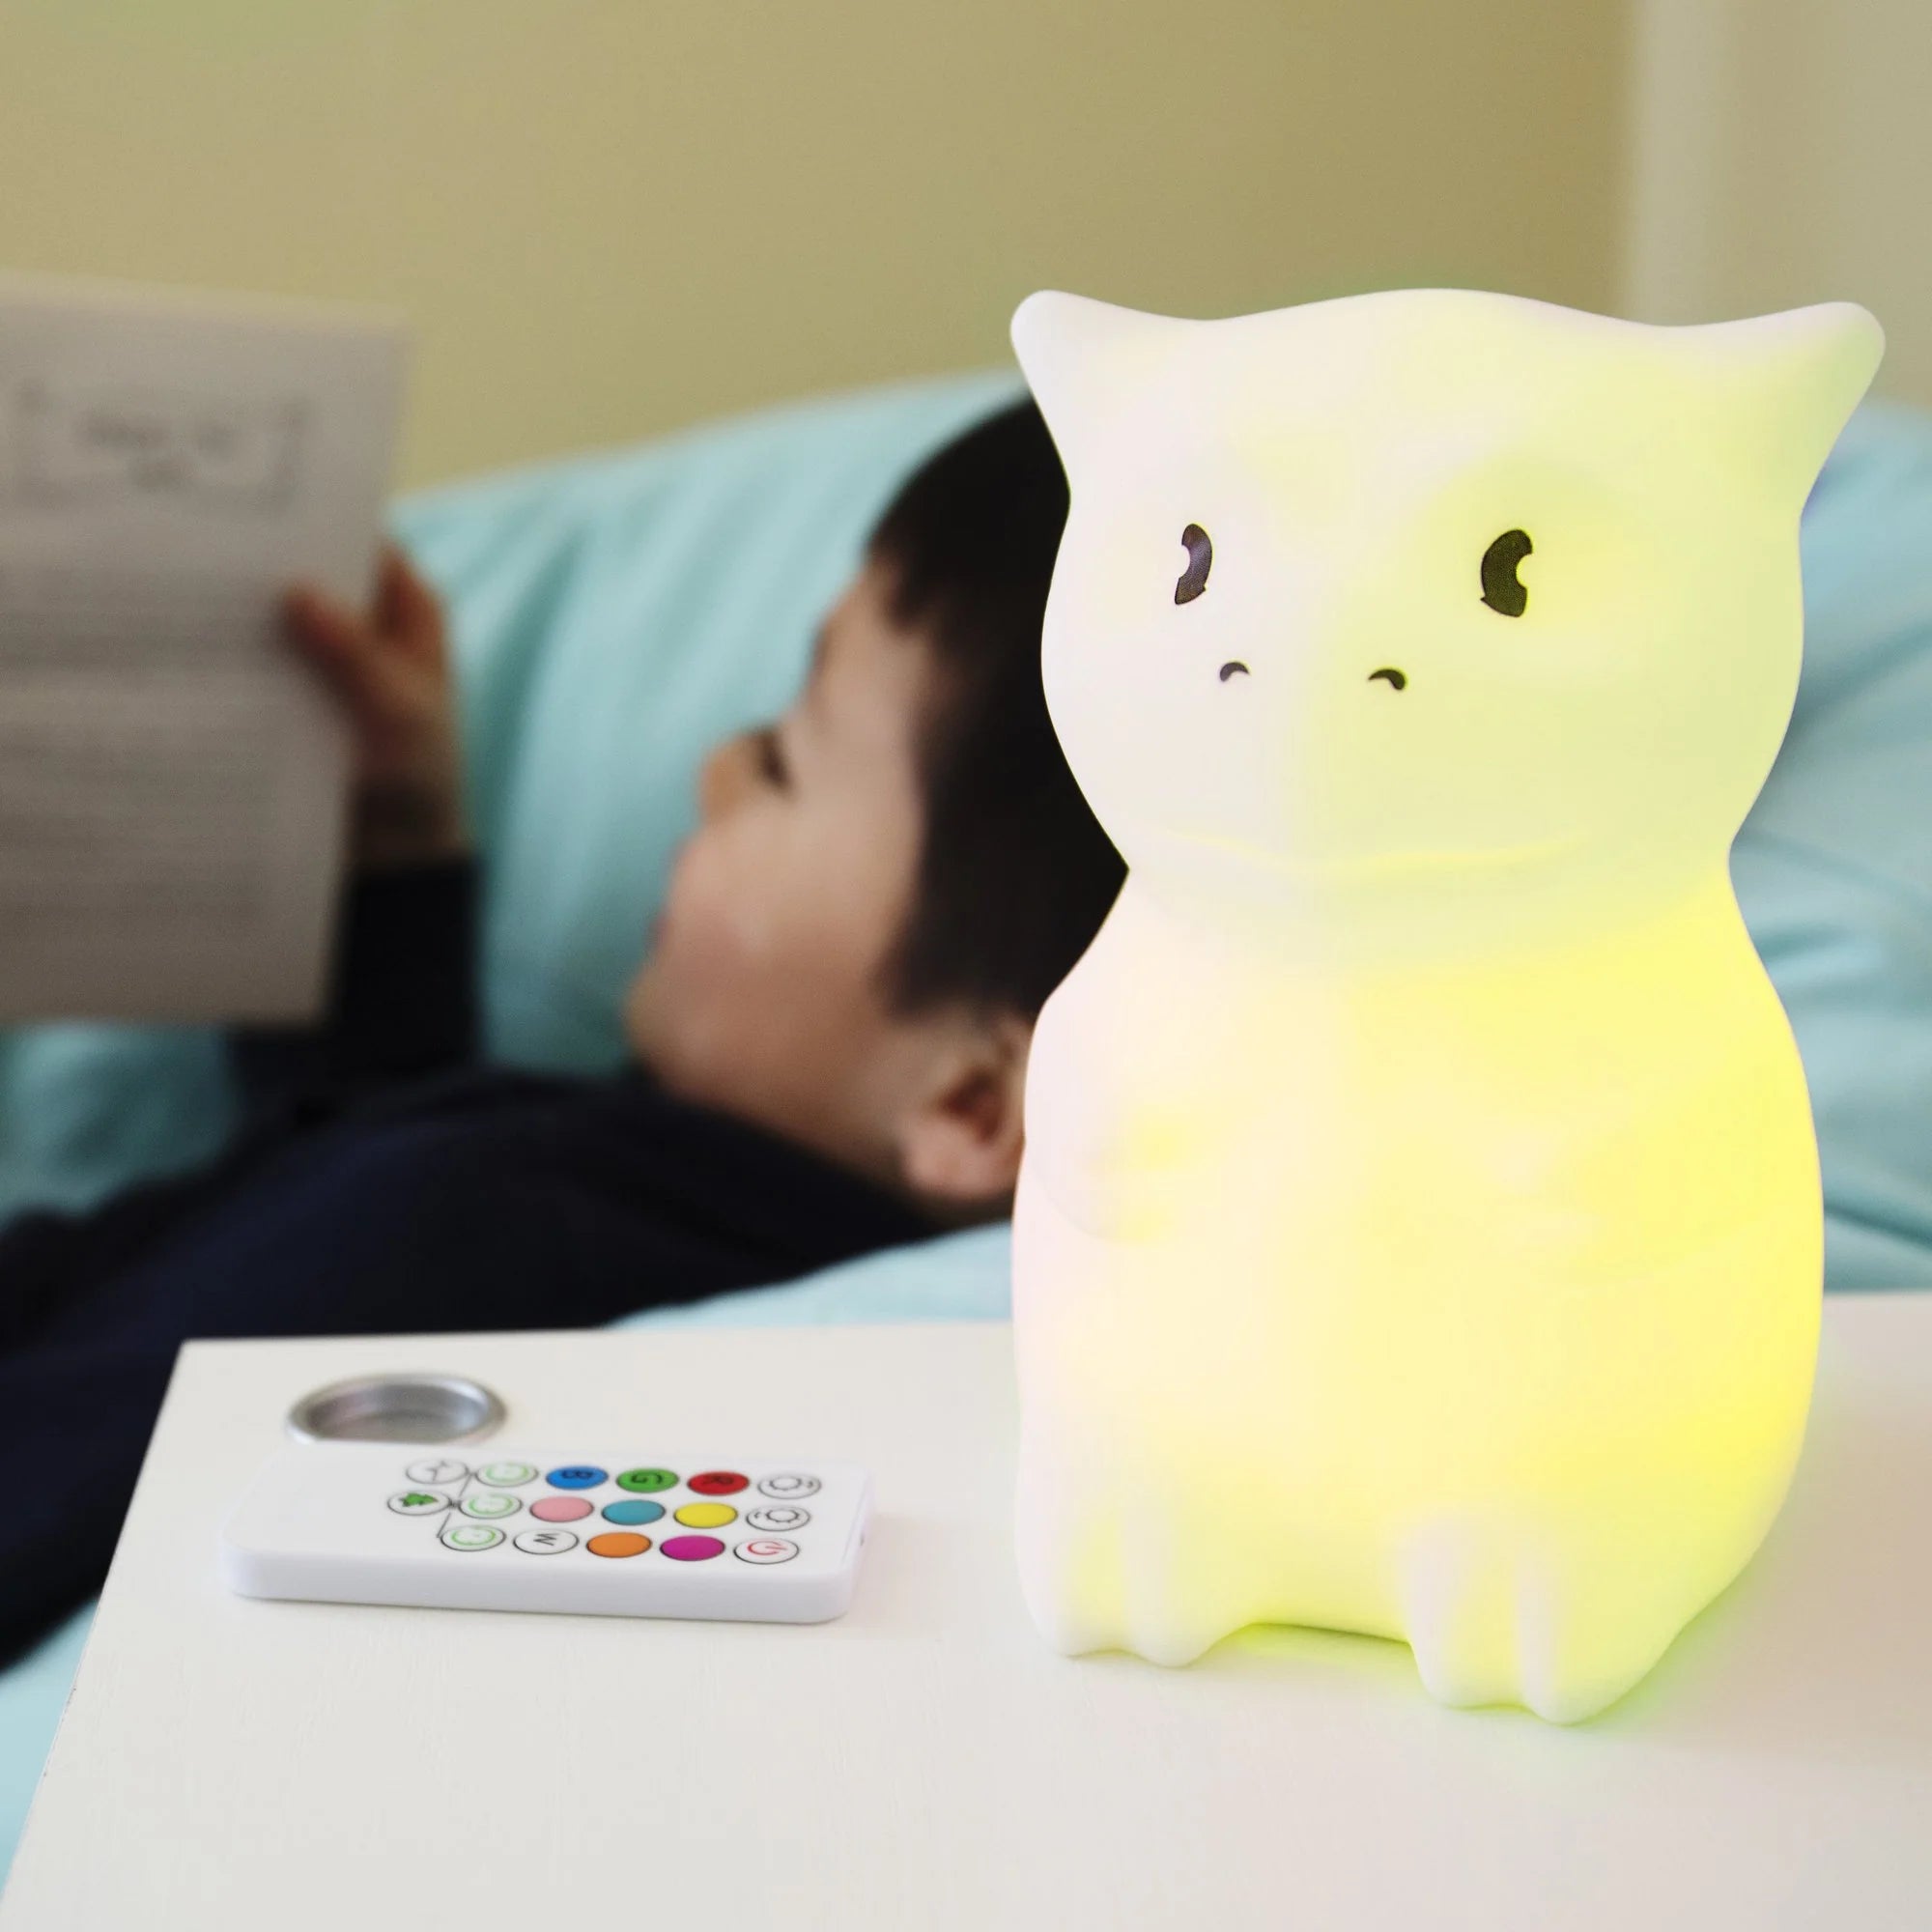 Lumieworld Dragon LED Night Light with Remote - ANB Baby -860000481830$20 - $50